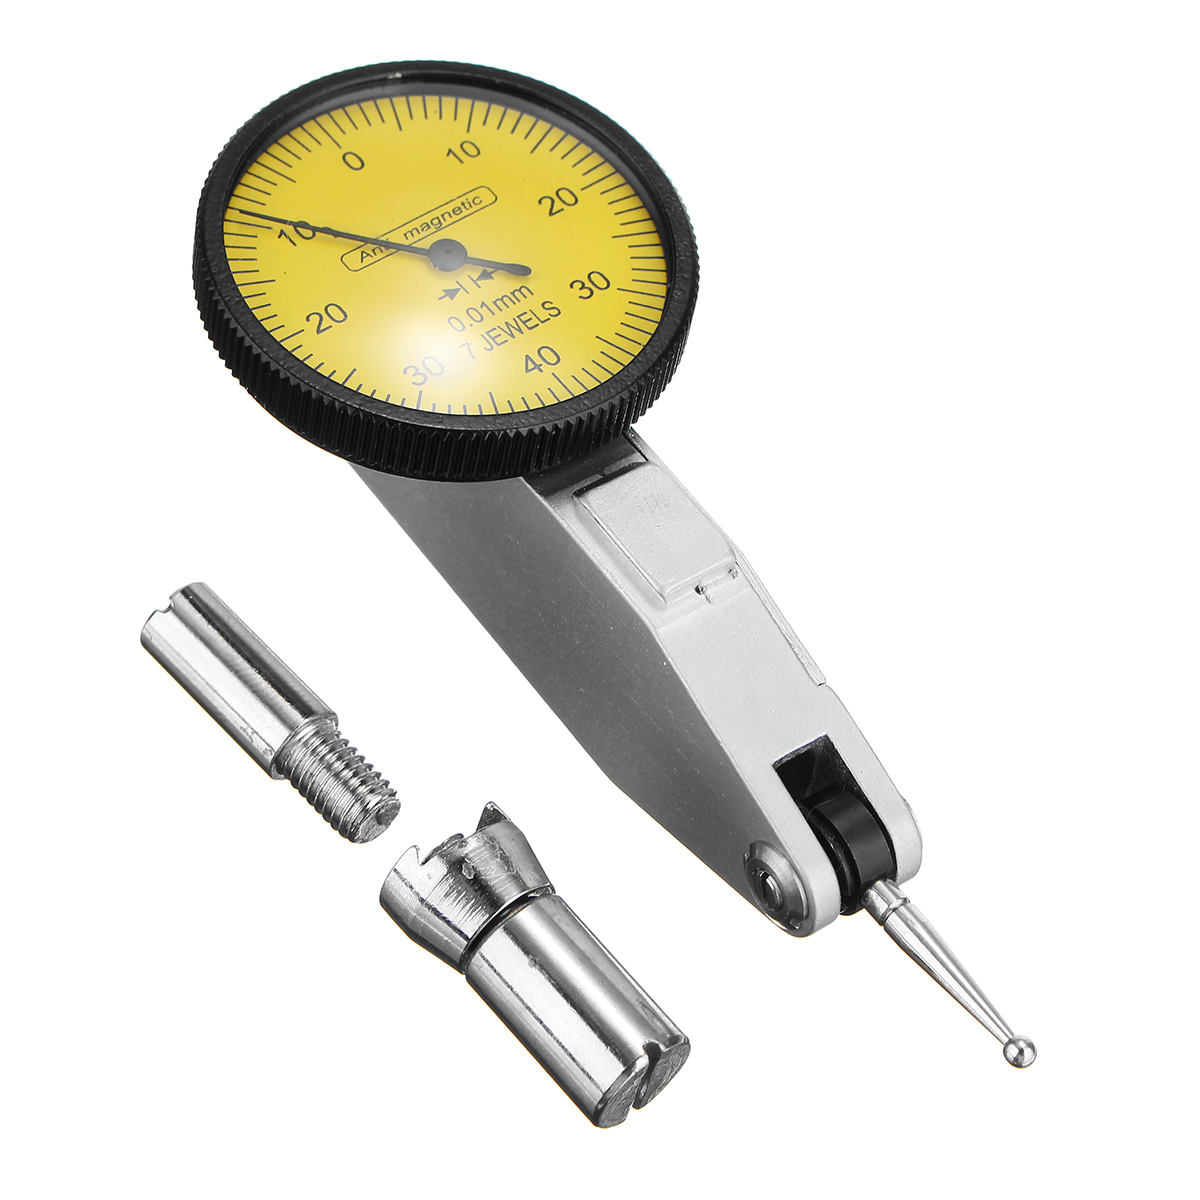 Universal-Magnetic-Base-Holder-Stand--Dial-Test-Indicator-Gauge-Scale-Precision-1274201-7